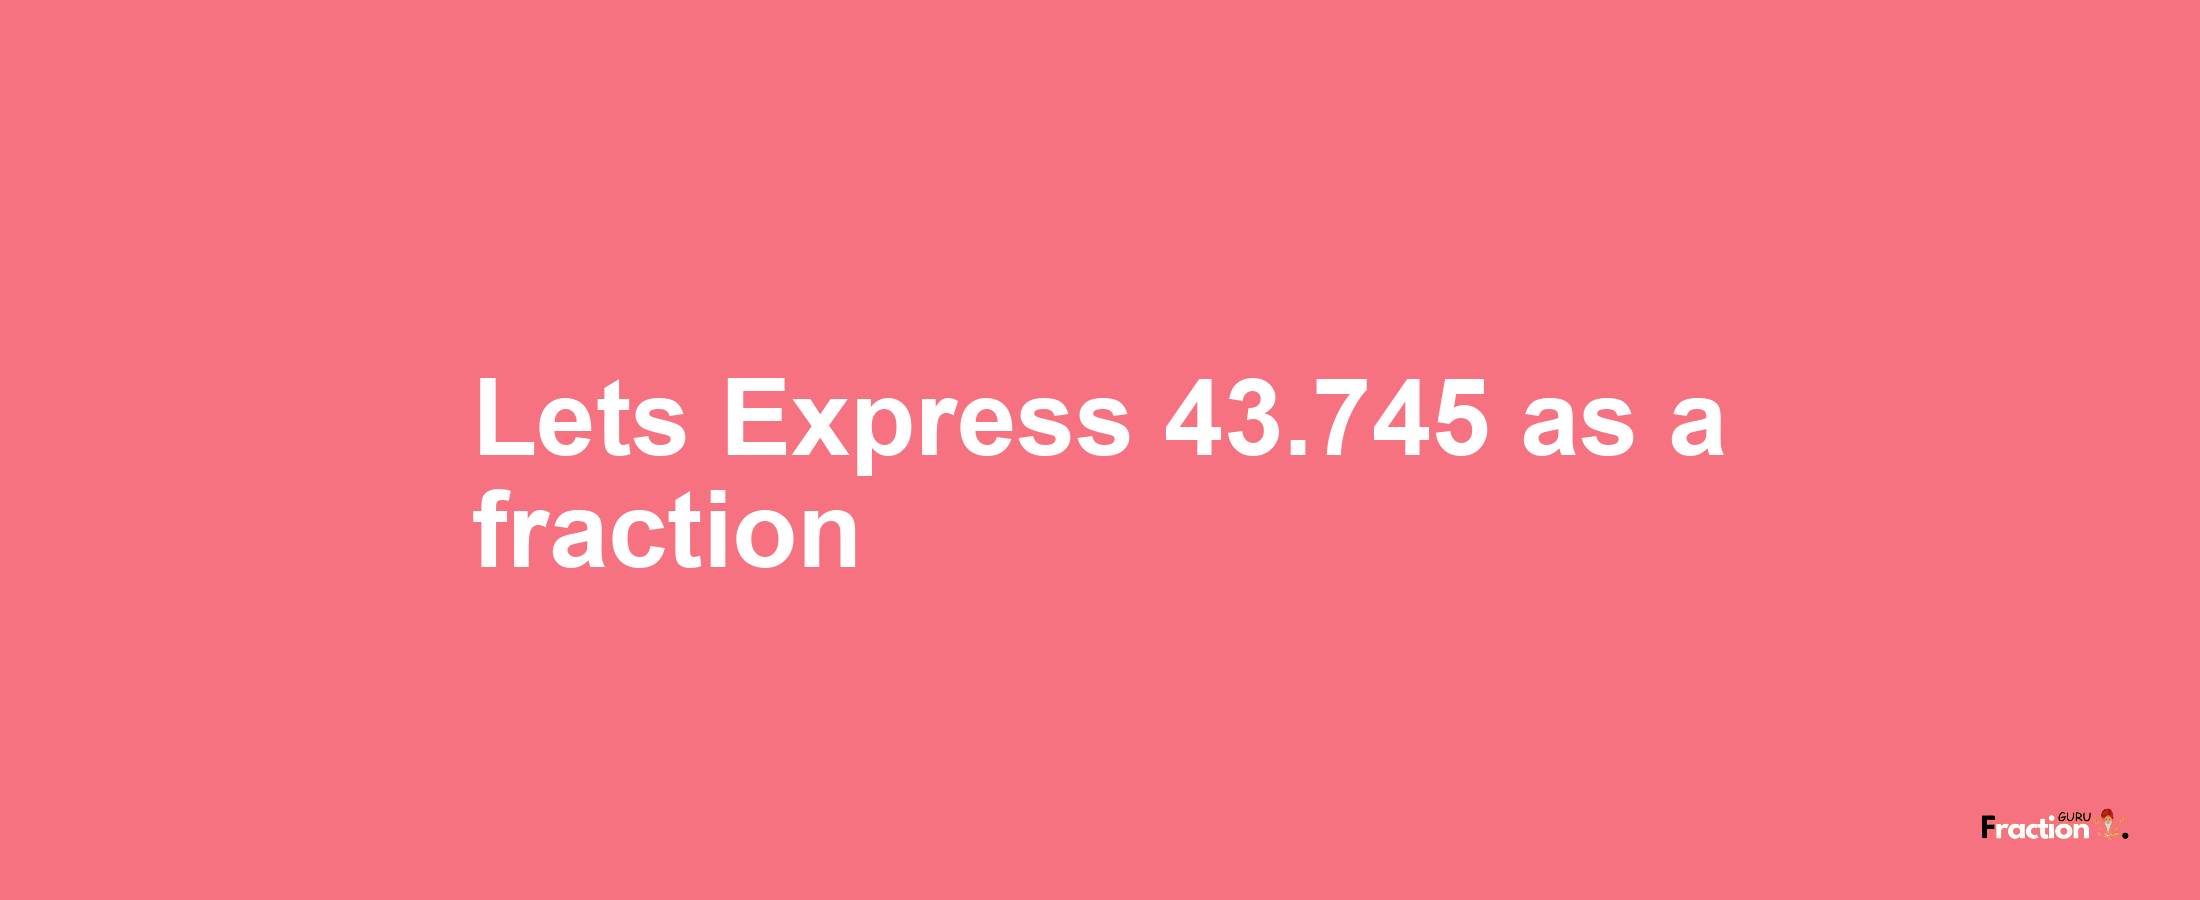 Lets Express 43.745 as afraction